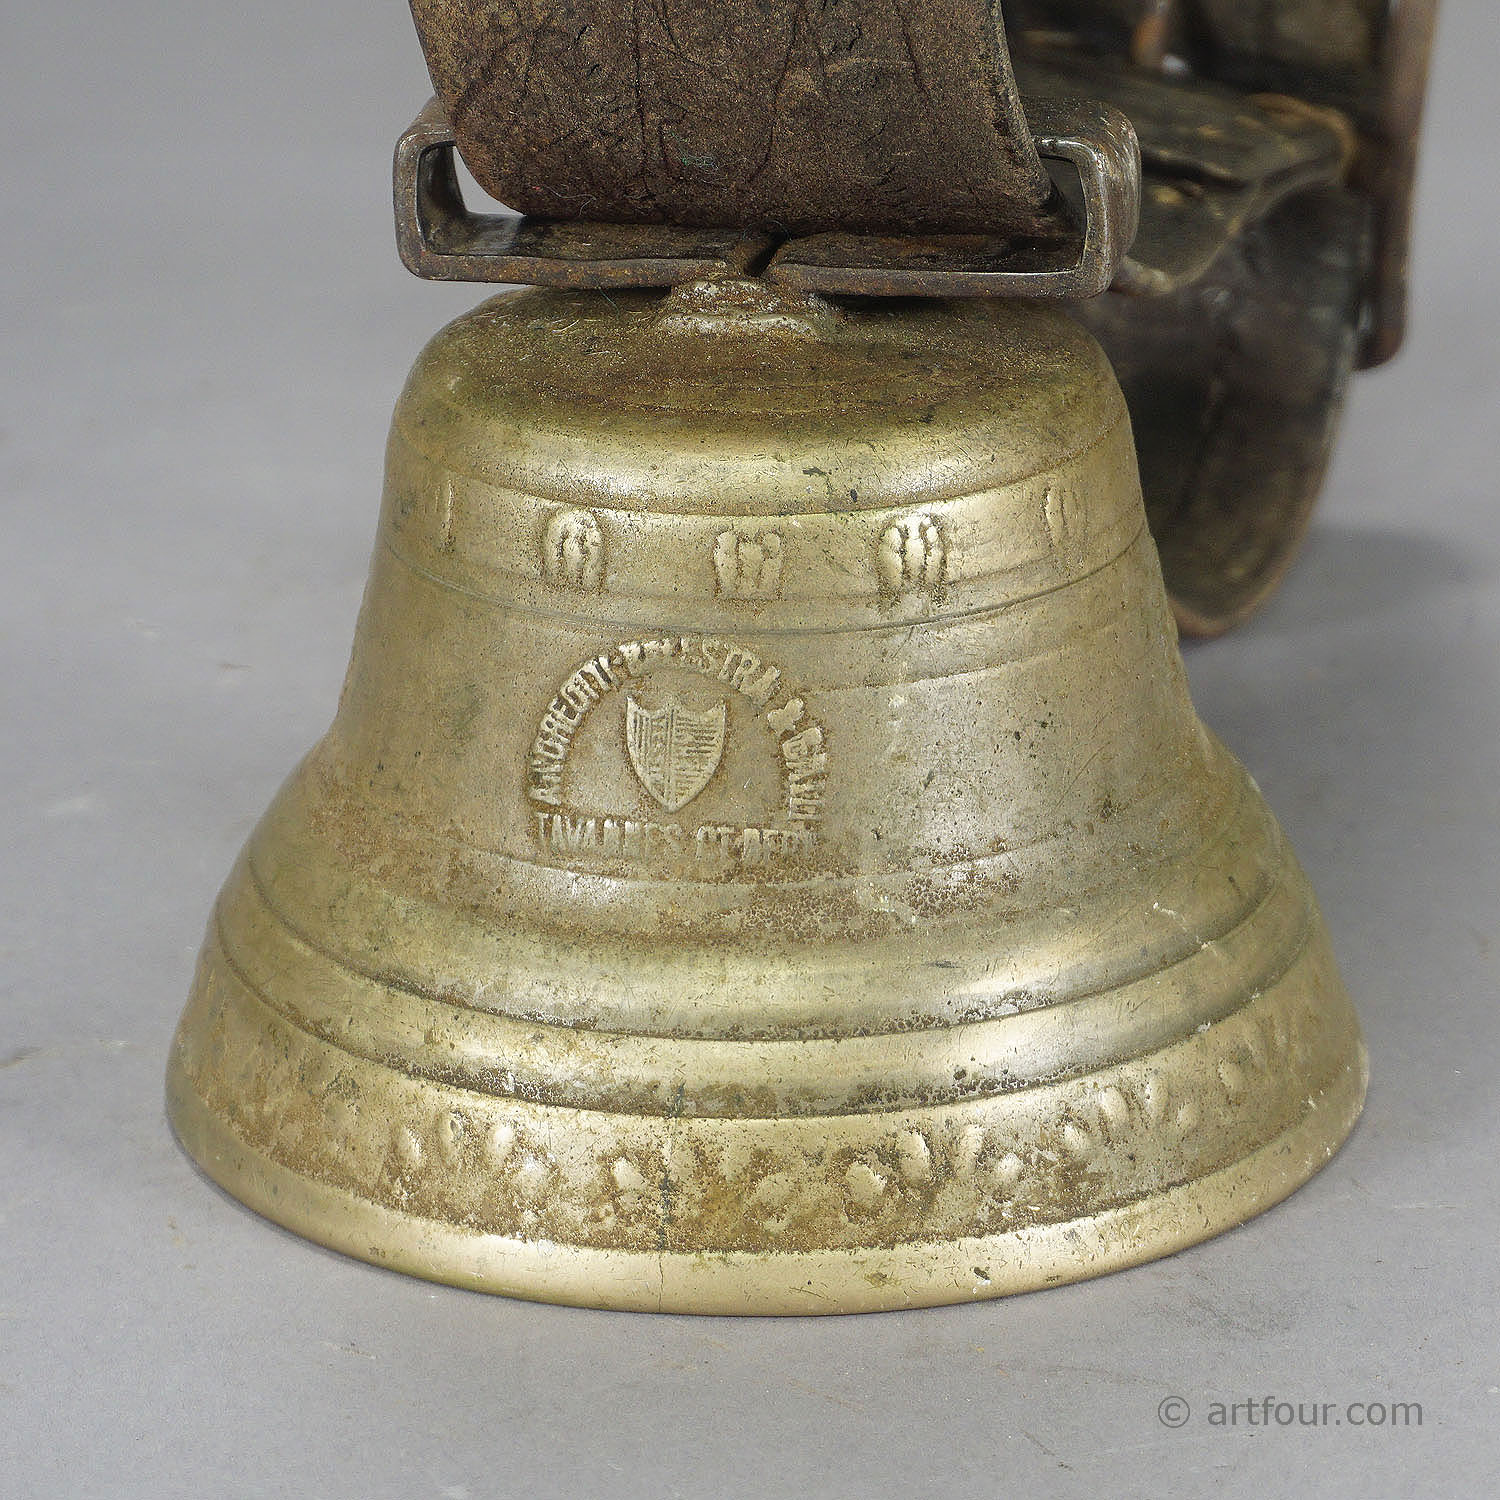 Casted Bronze Cow Bell with Leather Strap, Switzerland ca. 1900